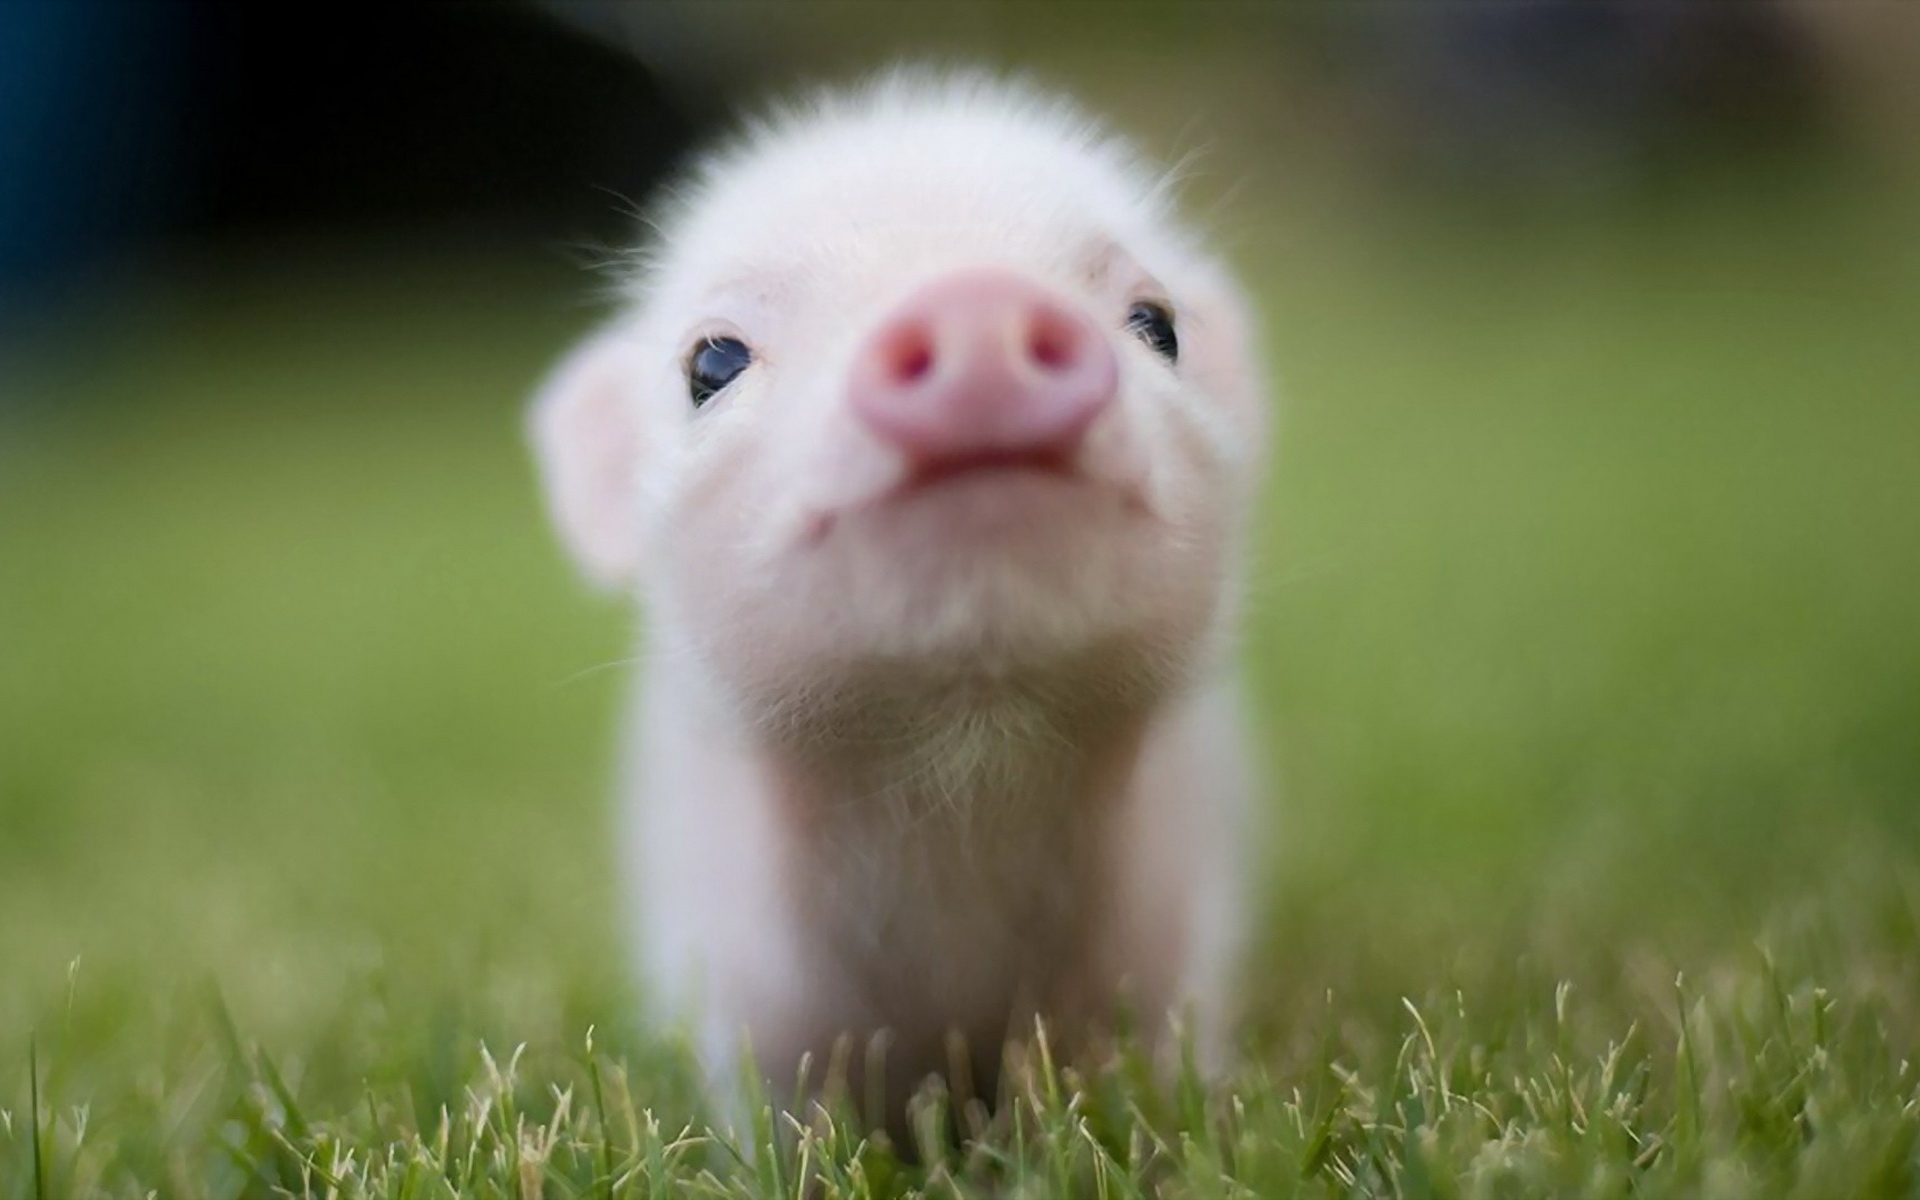 Little Pig Wallpaper And Image Pictures Photos